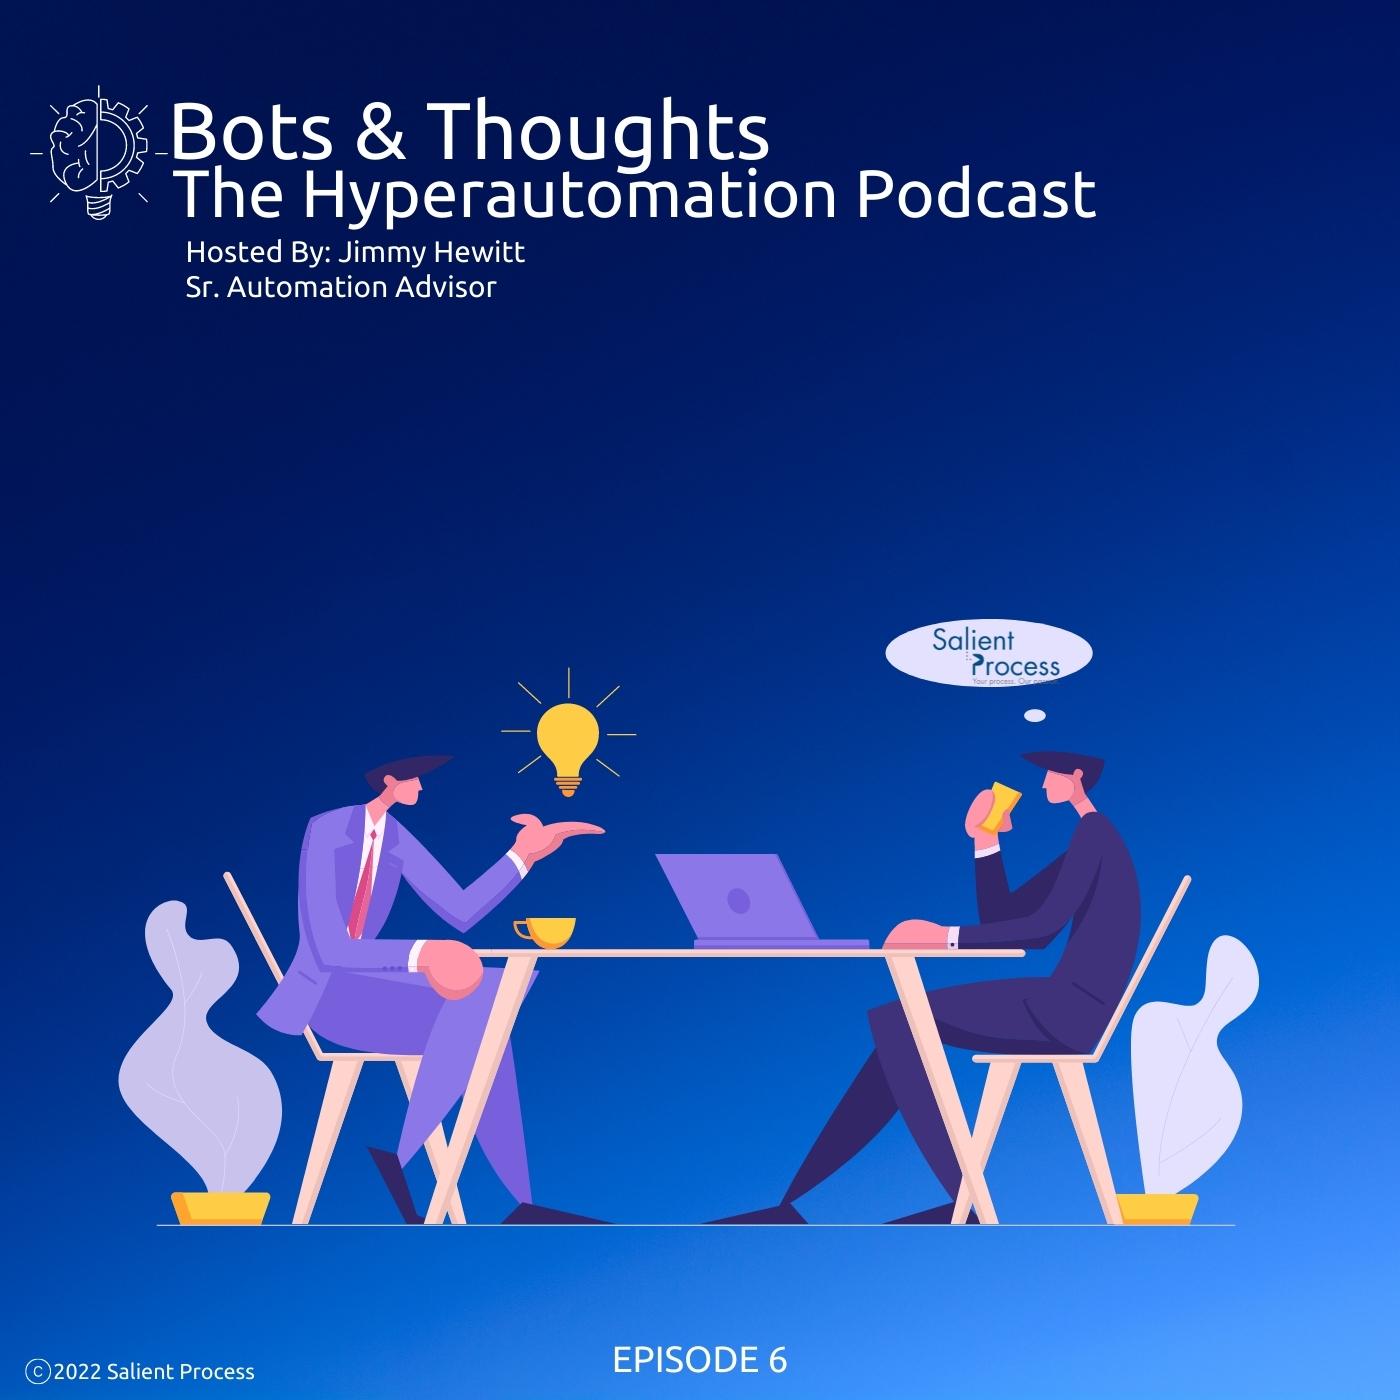 Bots & Thoughts: The Hyperautomation Podcast, Hosted by Jimmy Hewitt (Sr. Automation Advisor) - Episode 6 - Cover Art